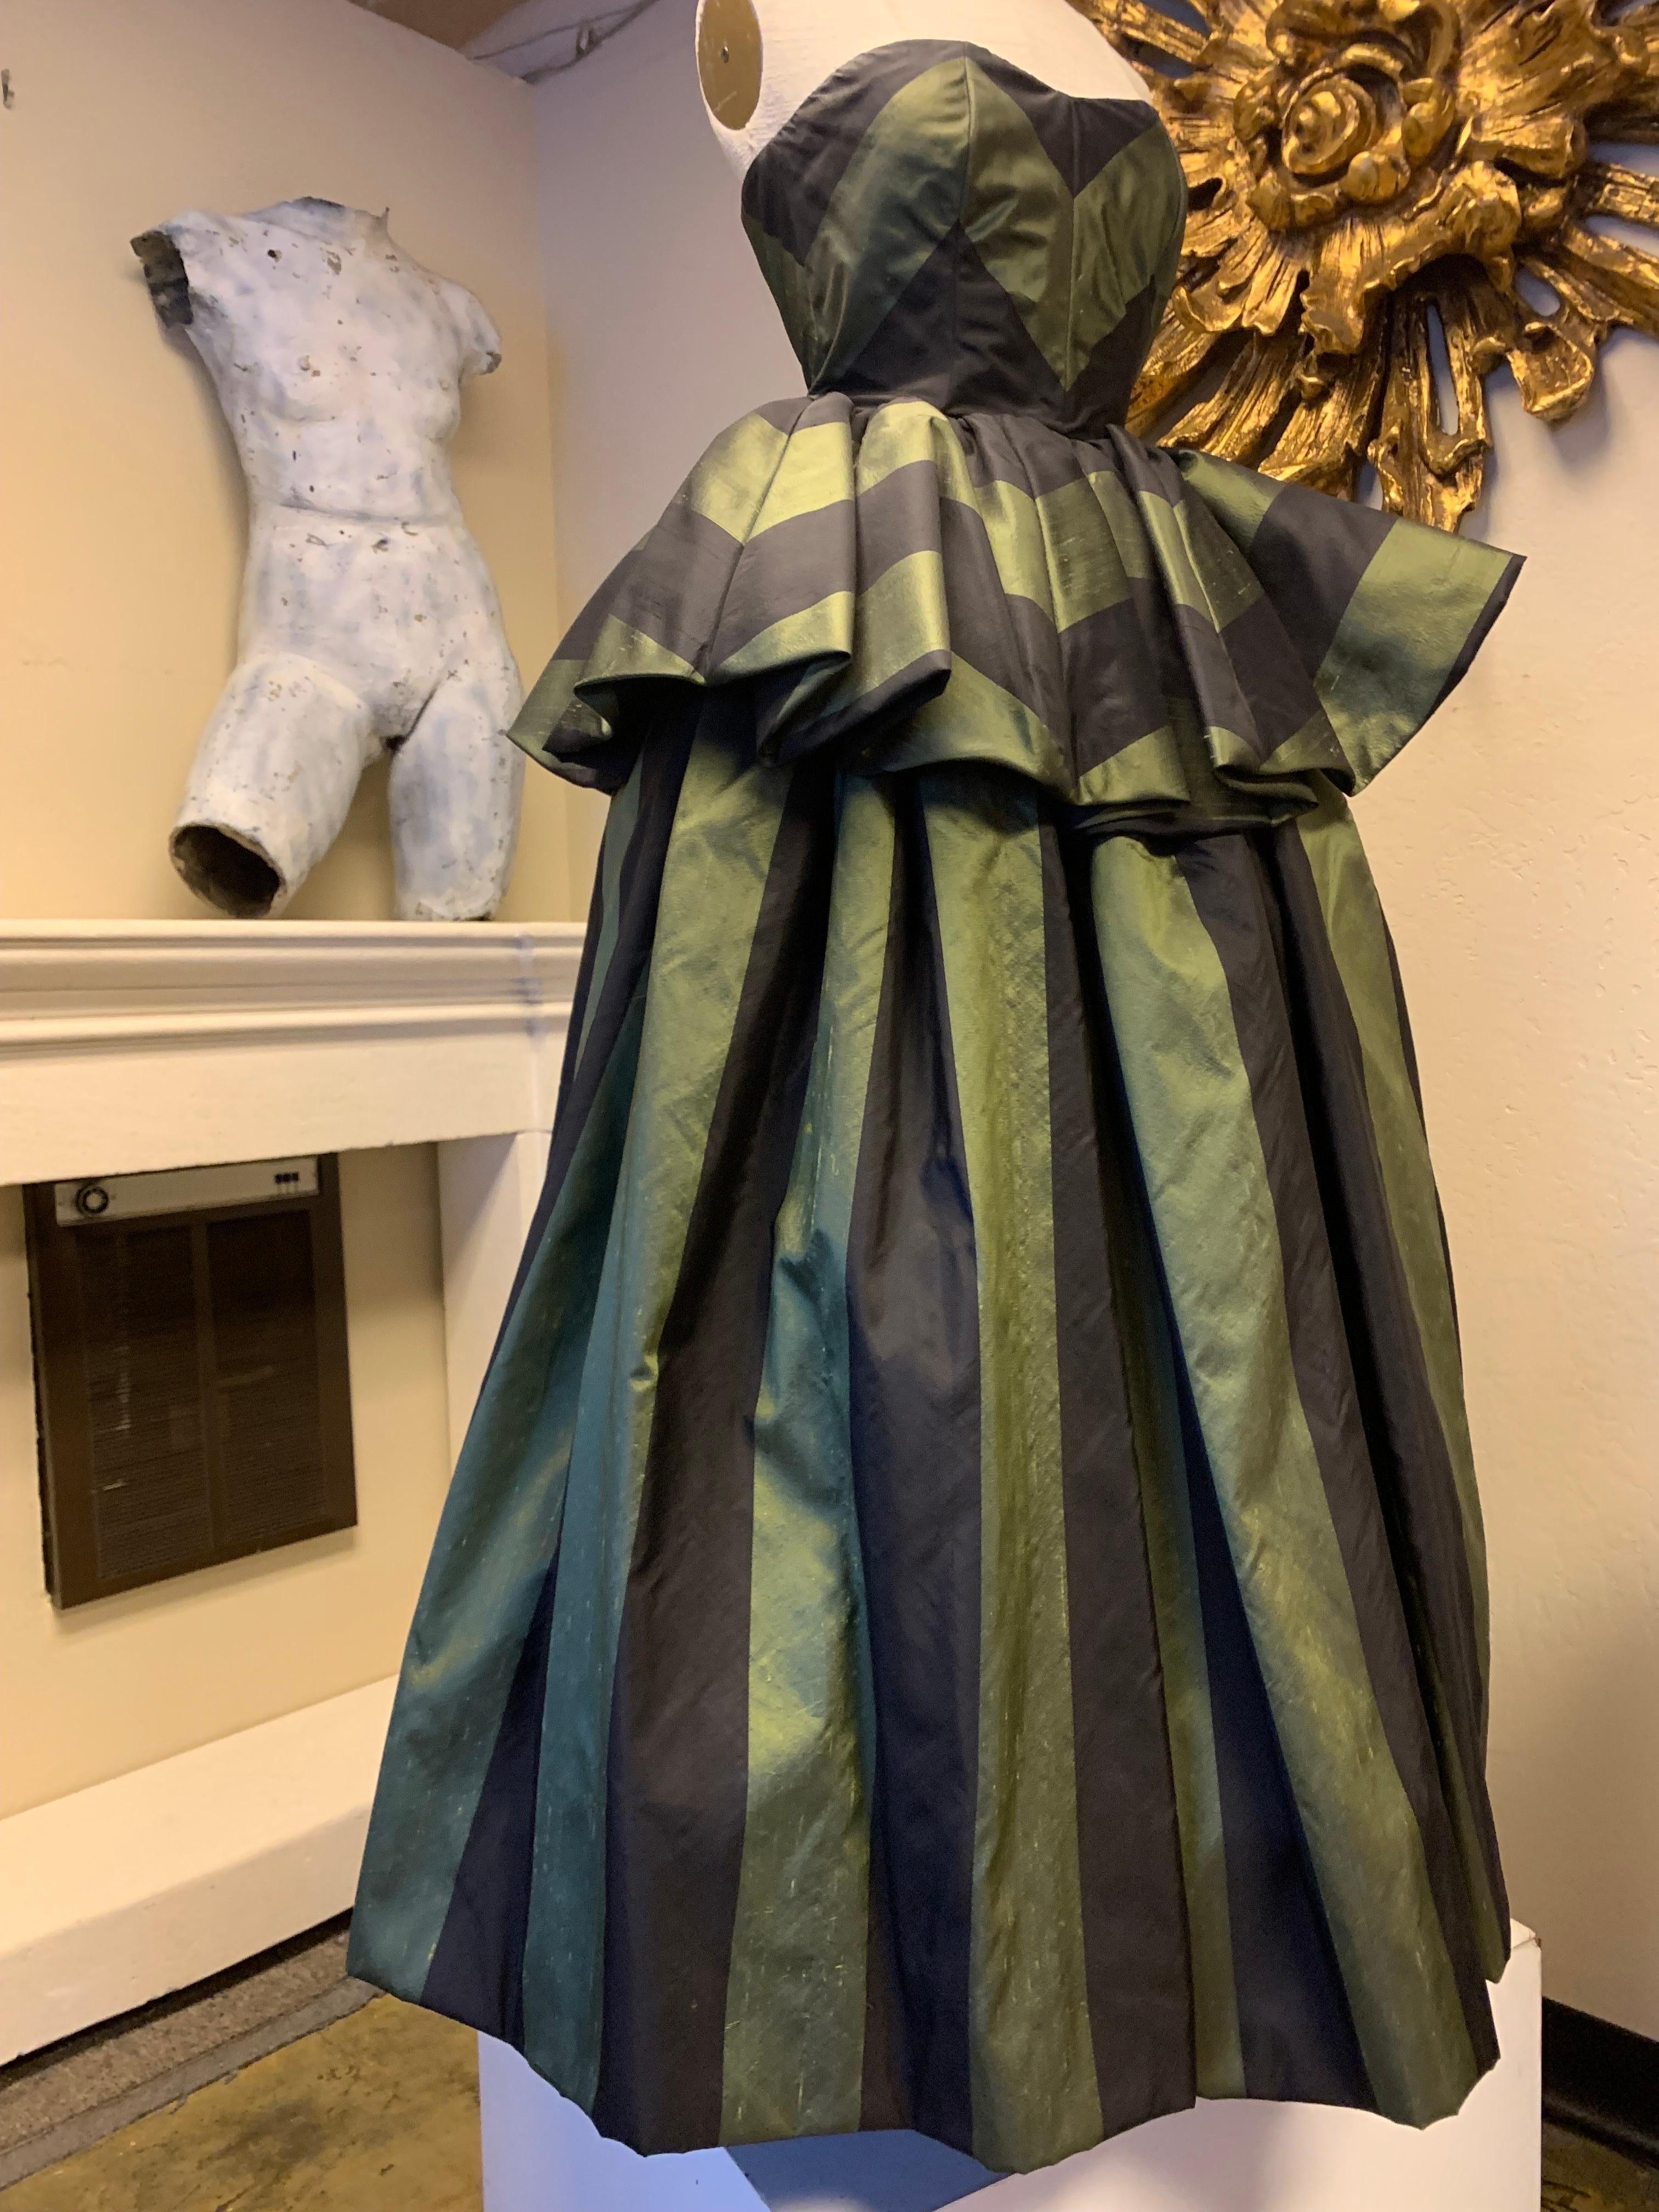 1980s Louis Feraud Green & Black Silk Taffeta Strapless Ballgown w Peplum: A bold, unforgettable stripe with wonderful mitering of pattern in peplum and bodice. Boned and heavily constructed bodice. Very full skirt can be worn with large crinoline